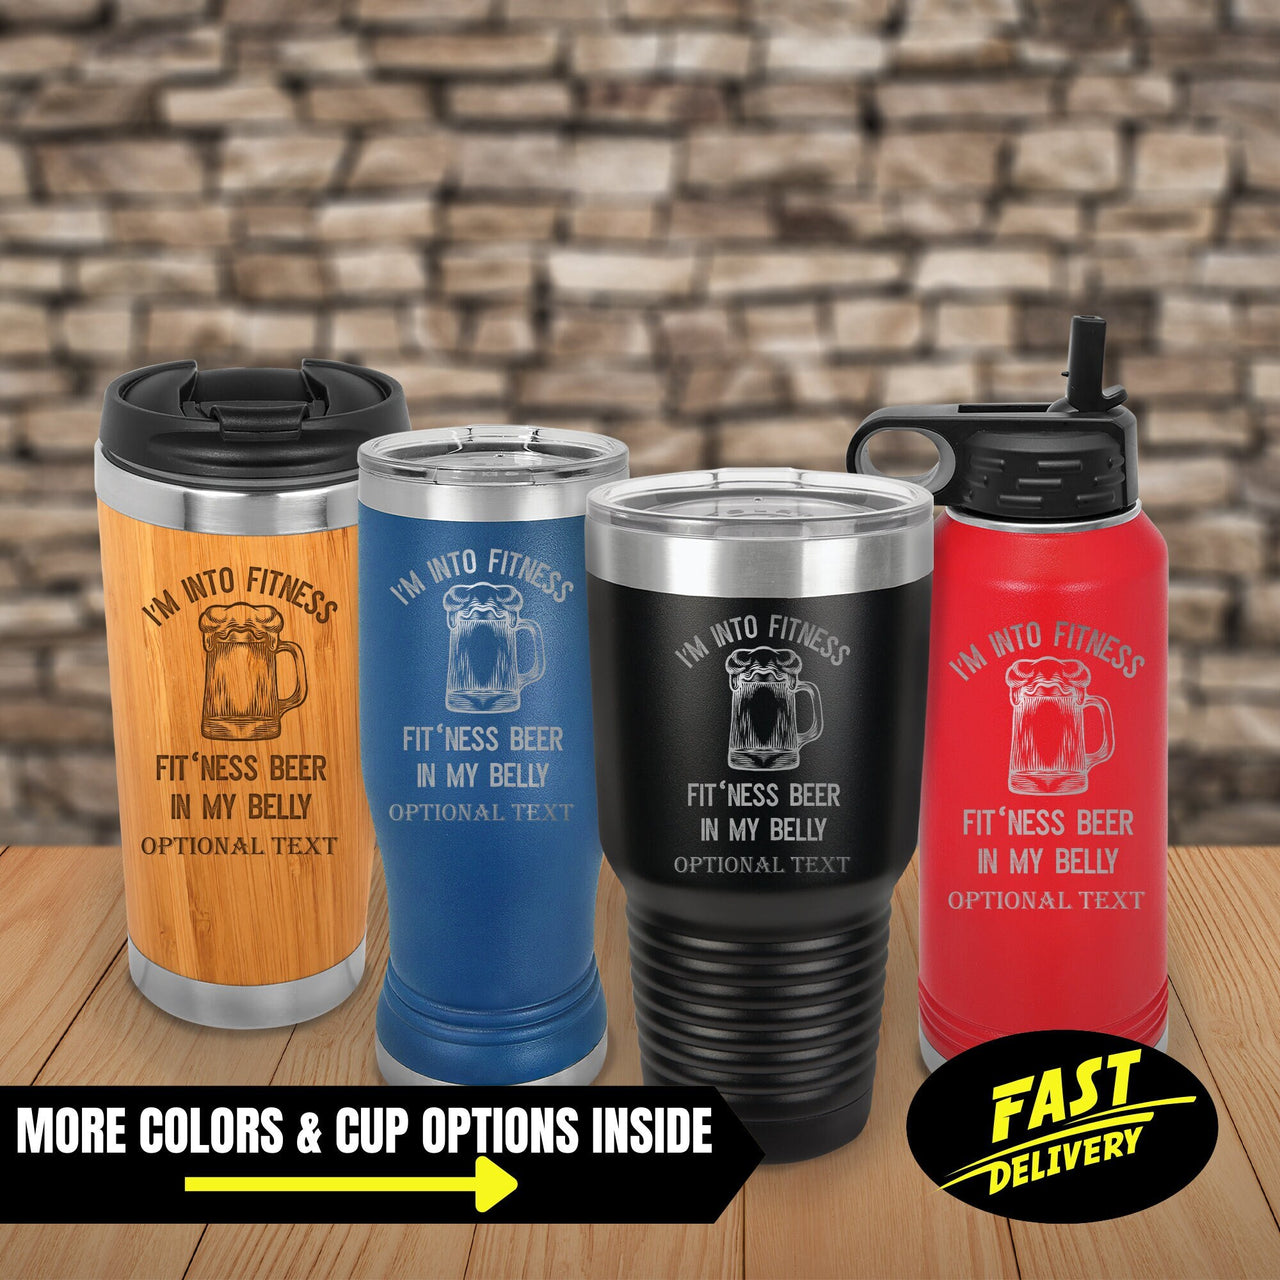 Funny Tumbler Gift, Custom Laser Engraved Insulated Tumbler, I'm Into Fitness - Fit'ness Beer In My Belly Tumbler, Personalized Tumbler Gift